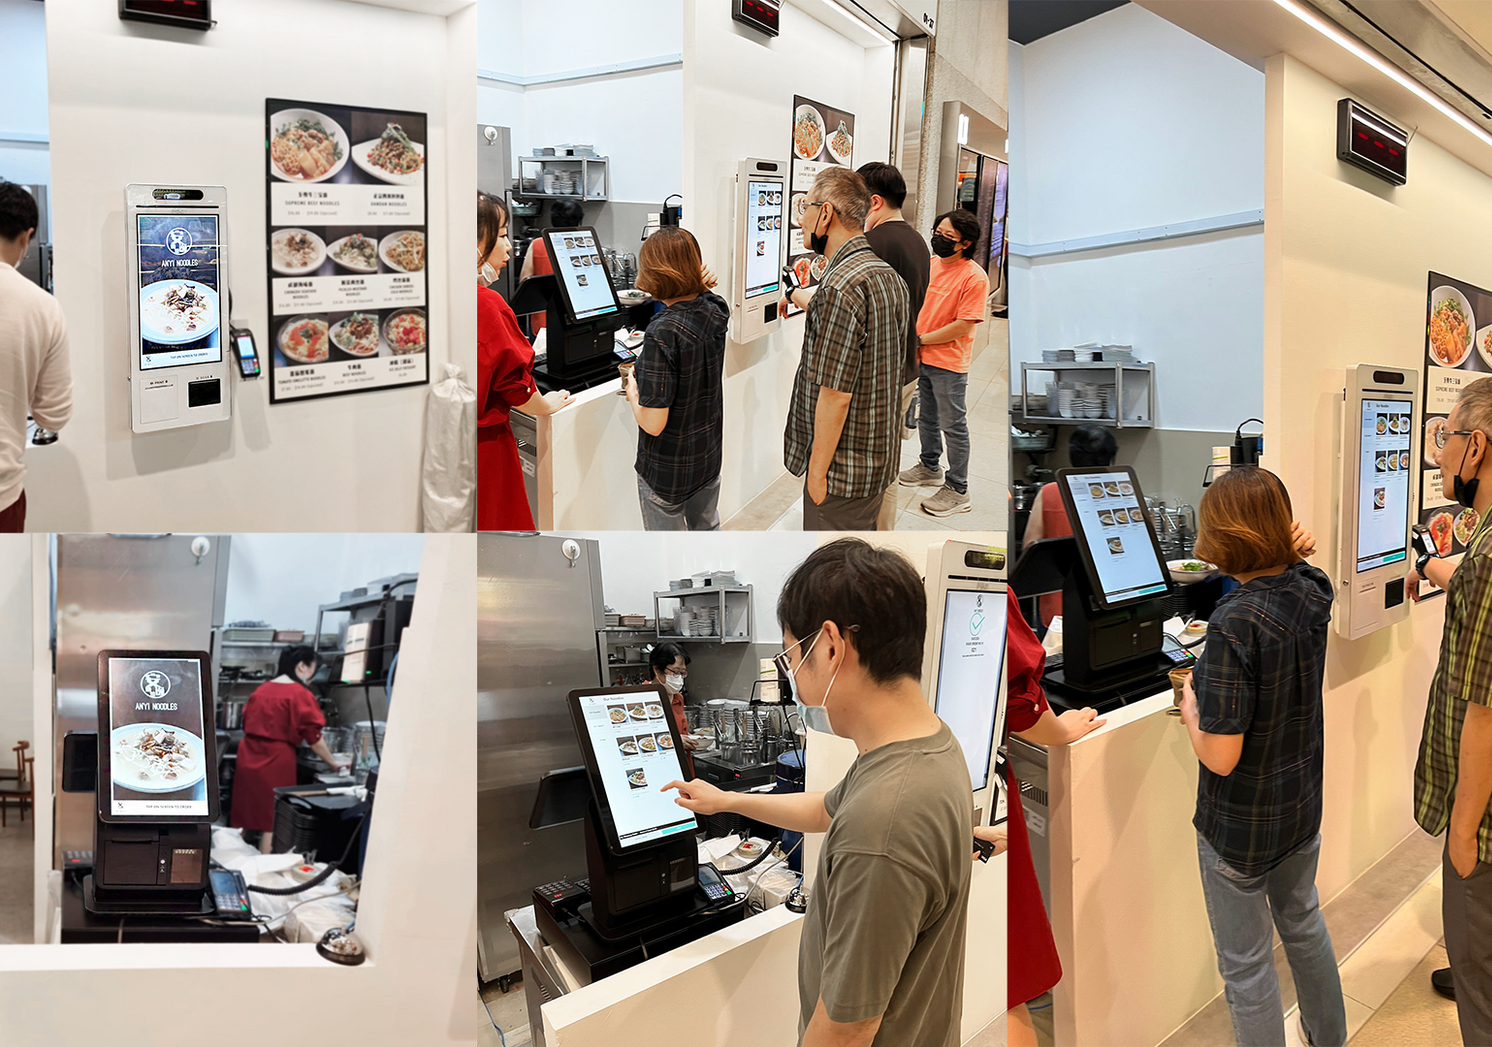 Anyi noodles hybrid pos and self ordering kiosk